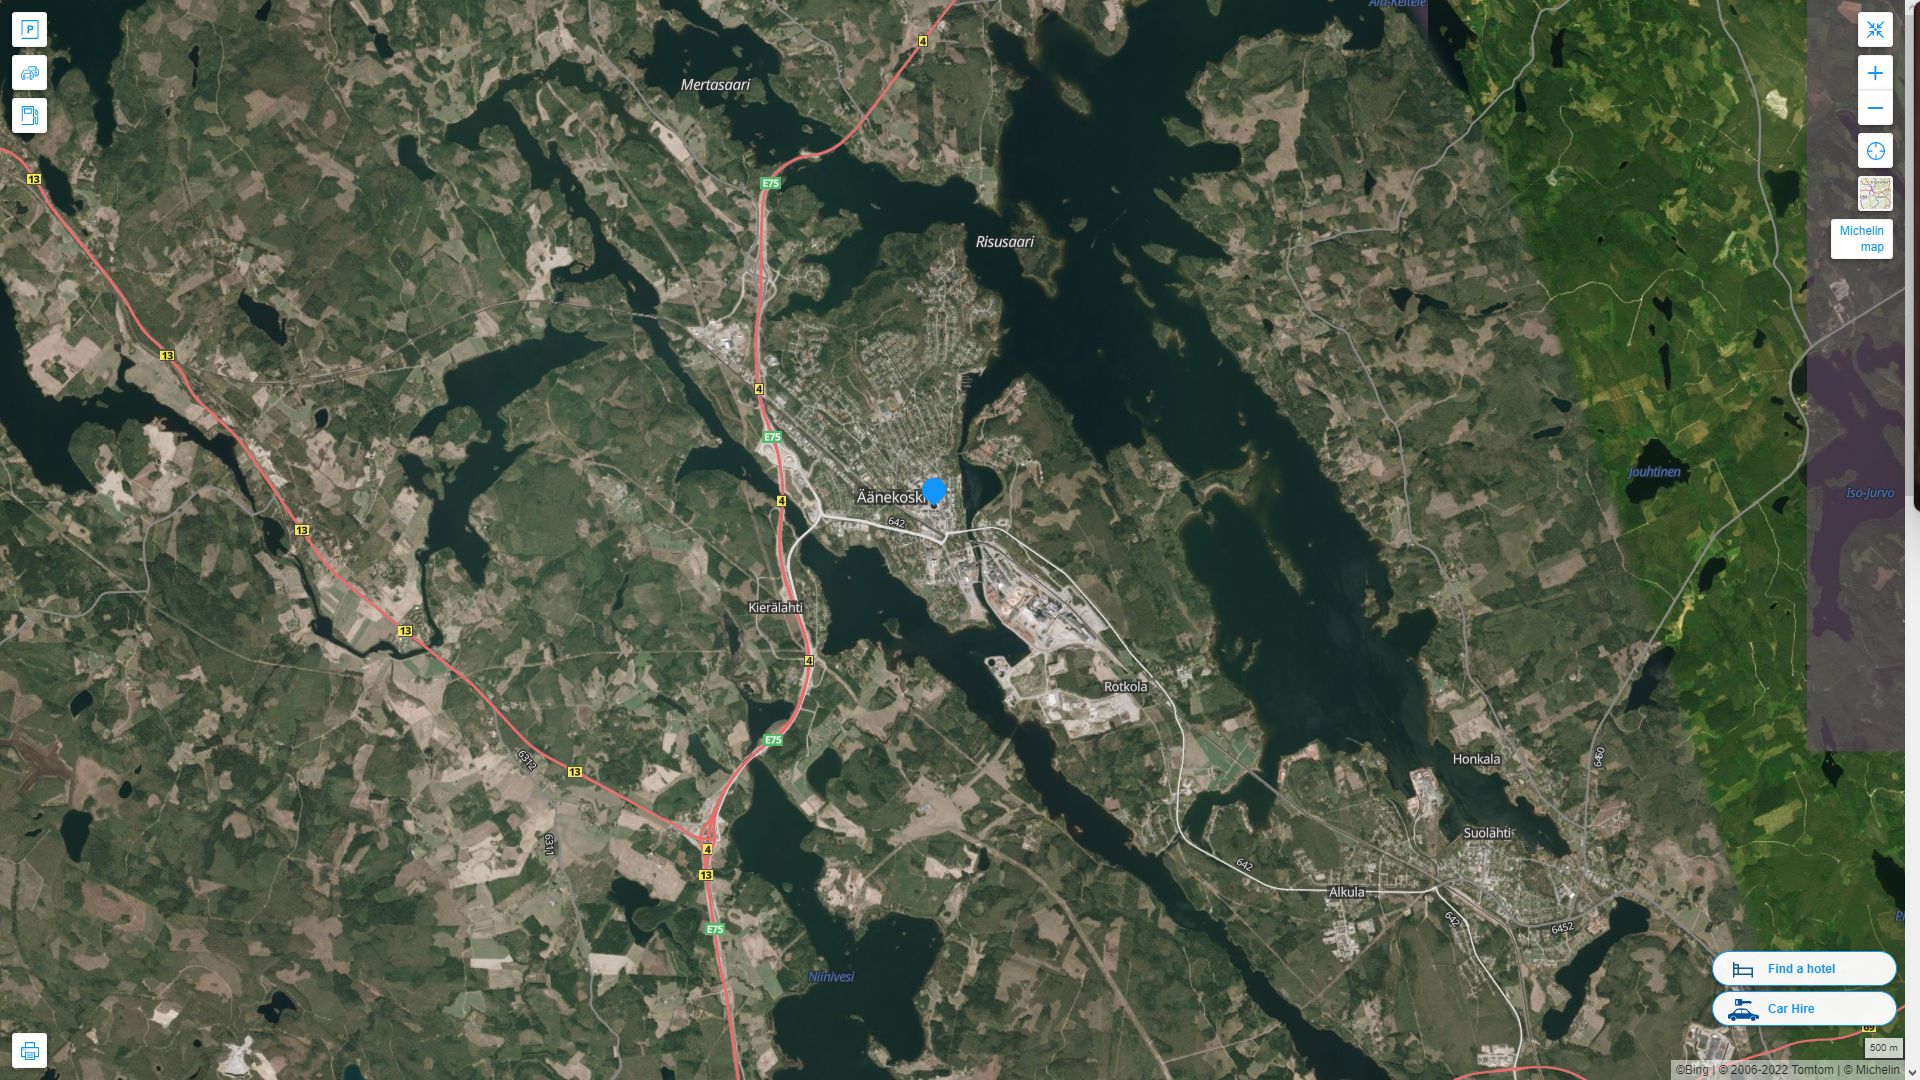 aanekoski Highway and Road Map with Satellite View